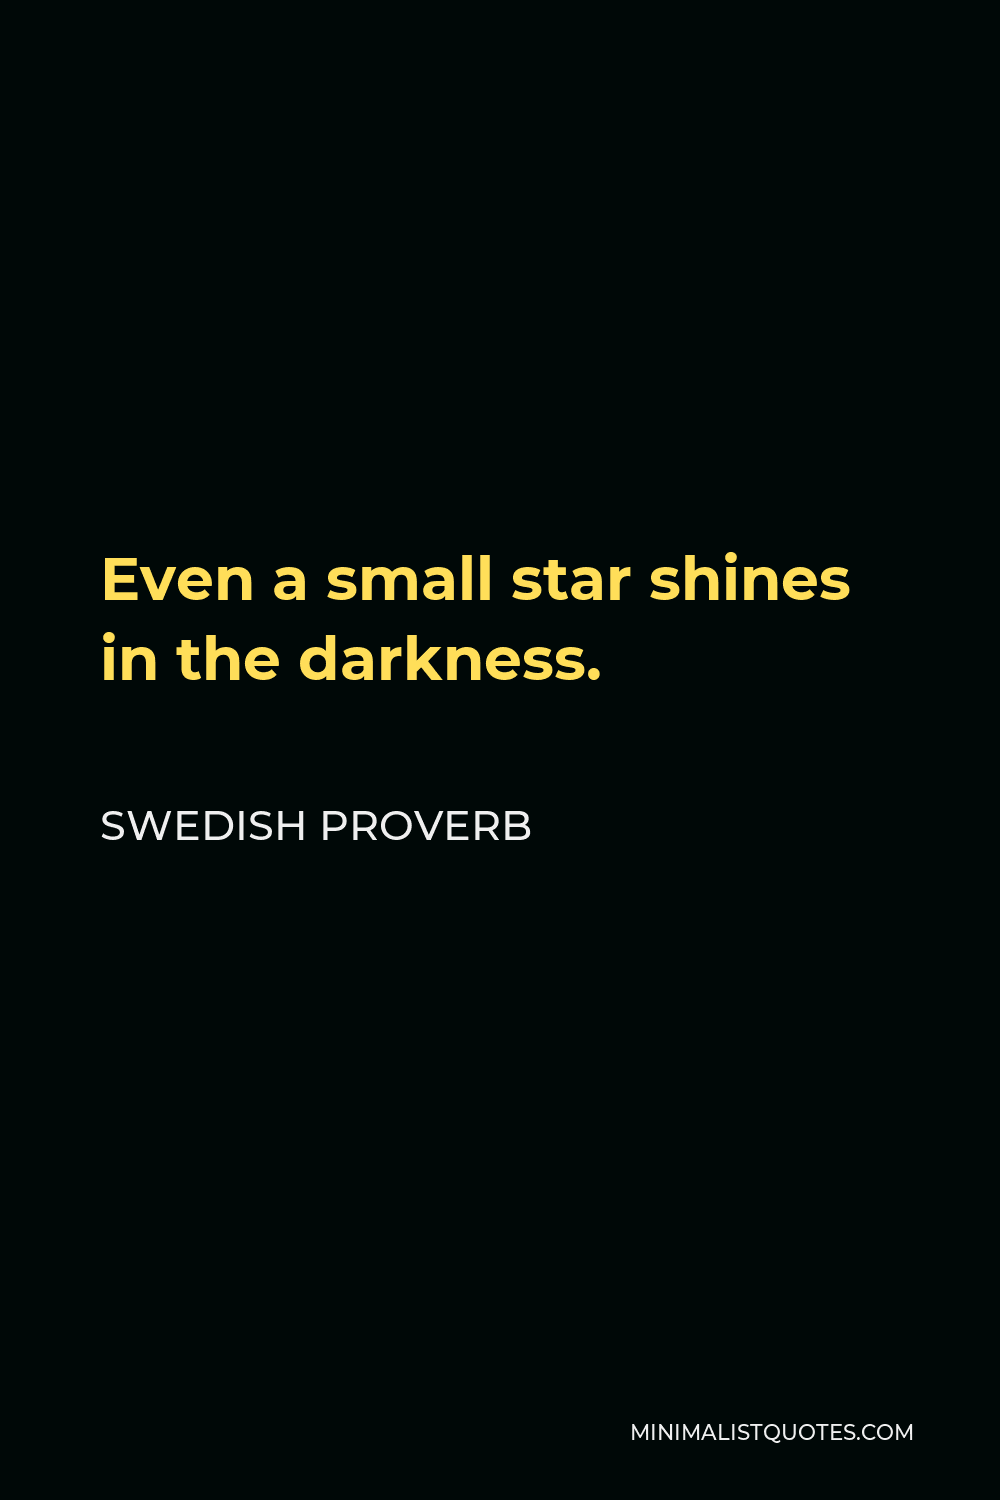 Swedish Proverb Quote - Even a small star shines in the darkness.